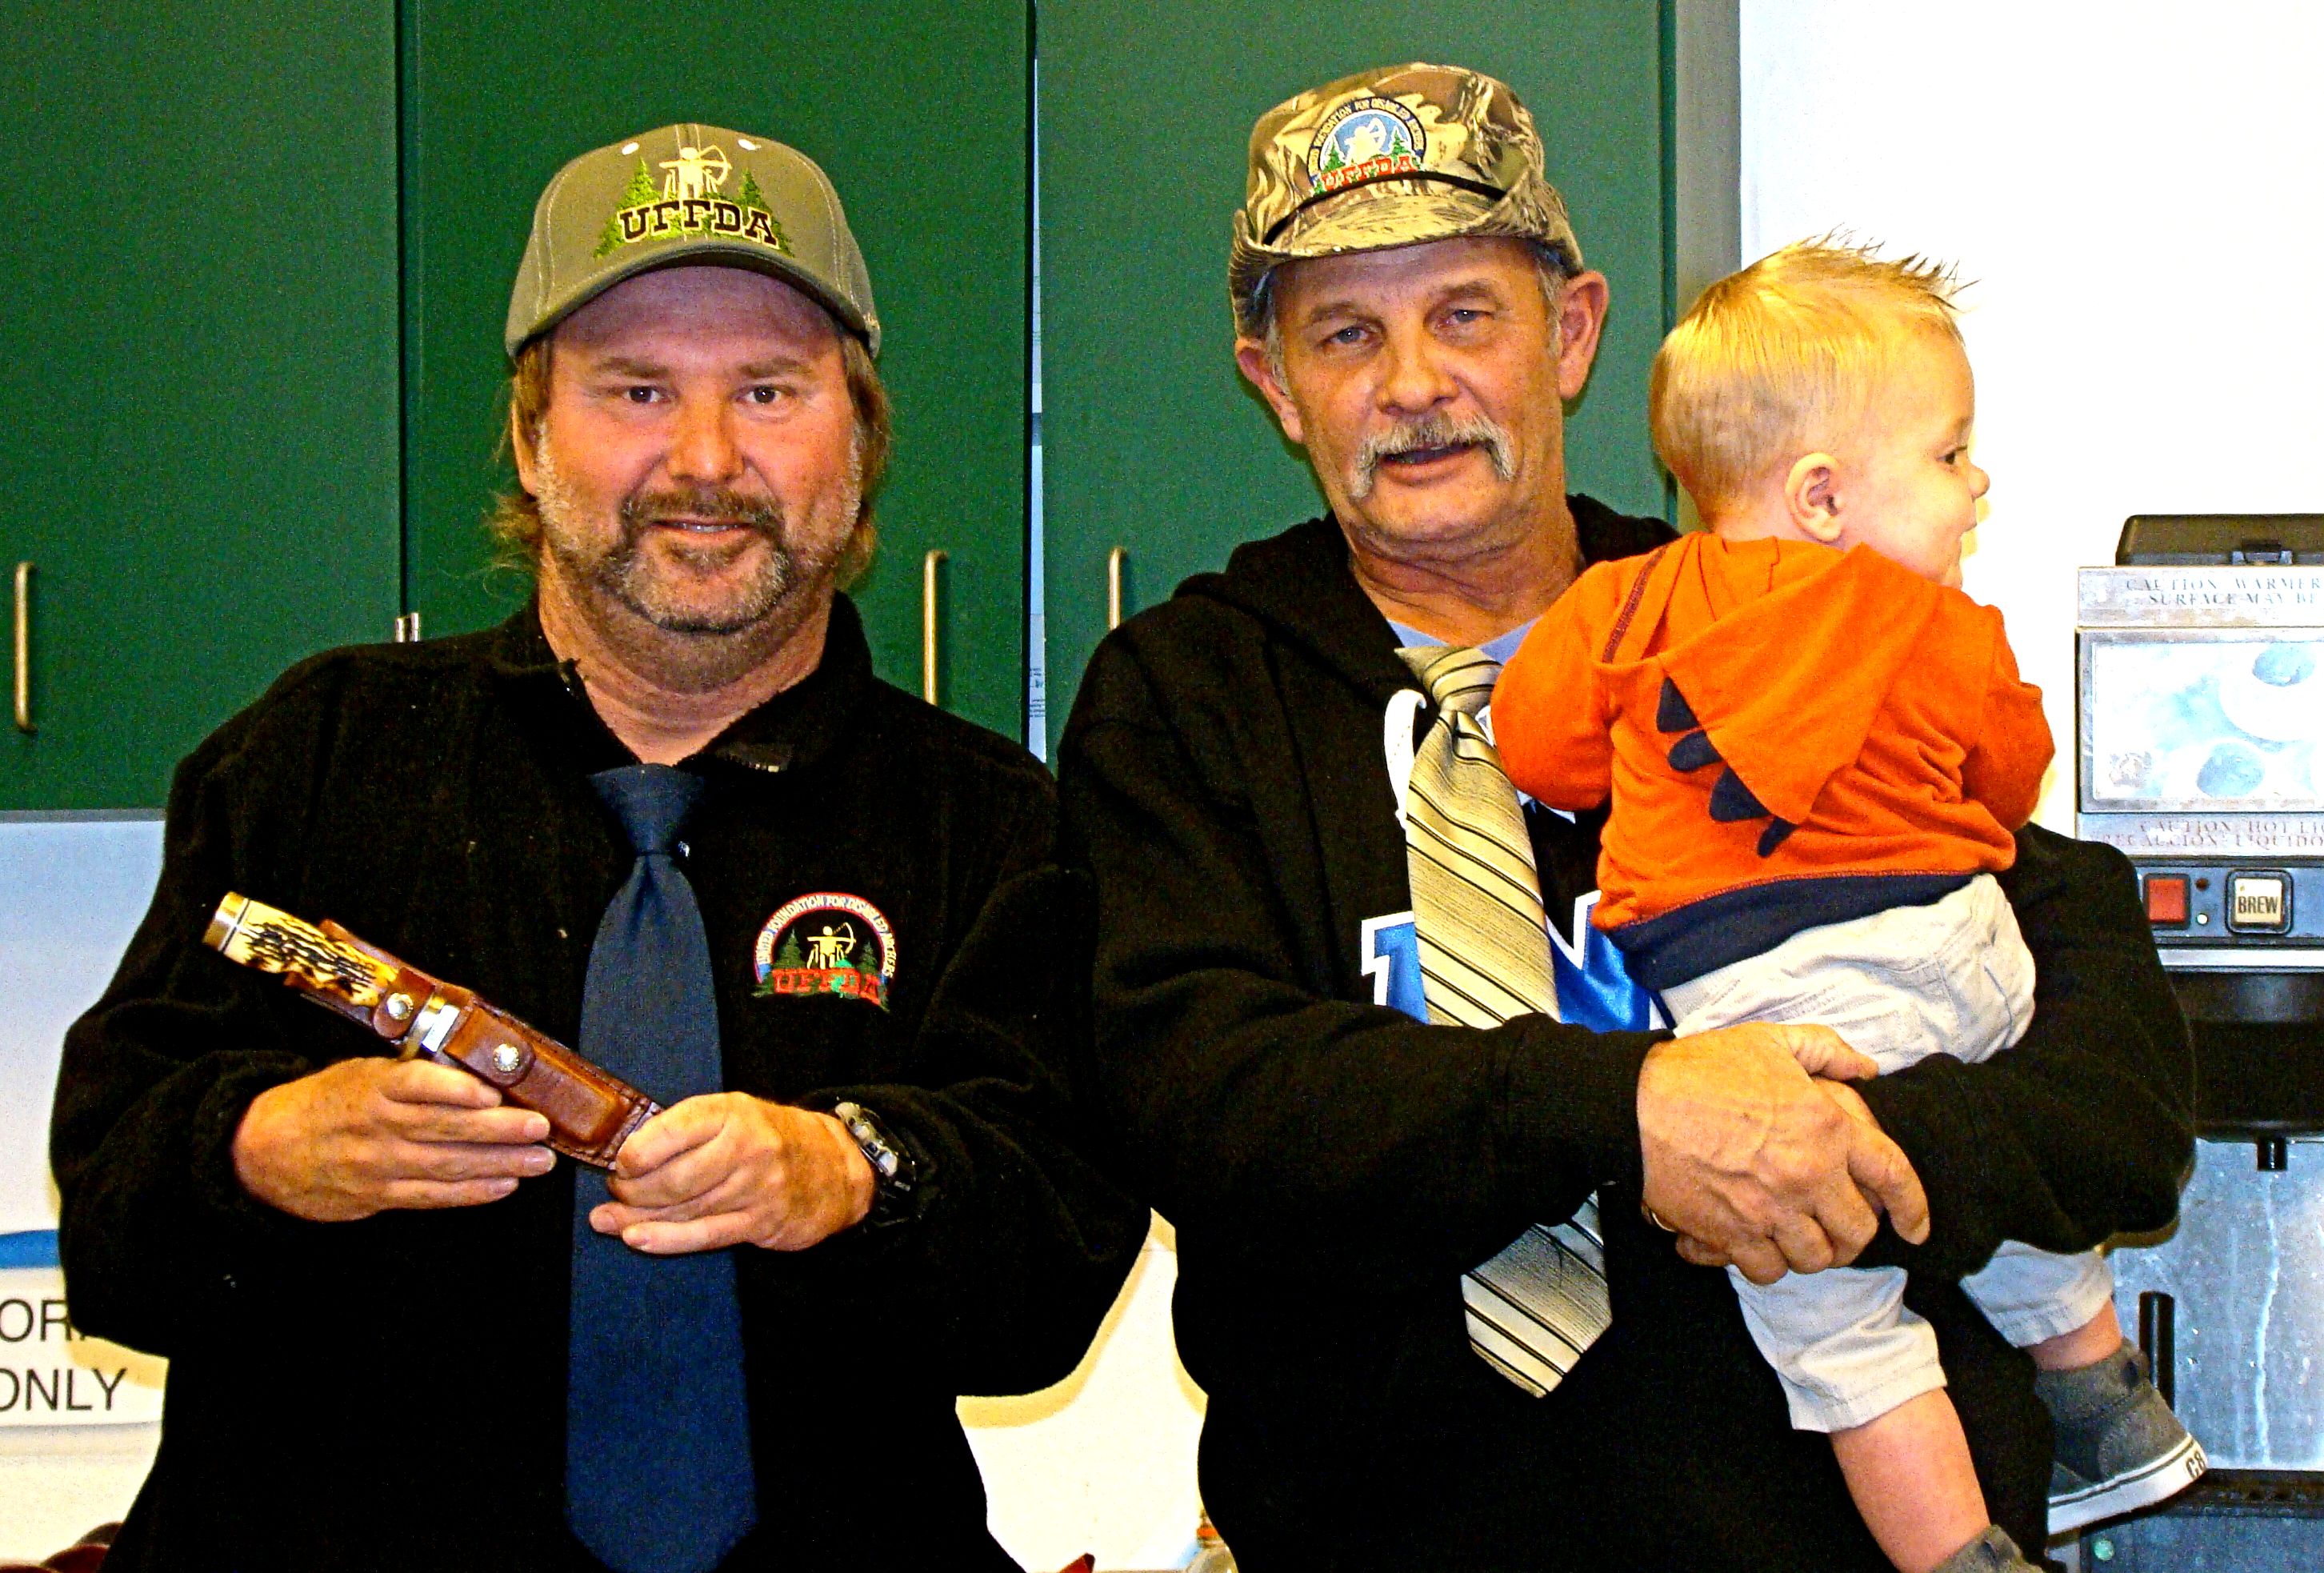 Head guide, complete with grandson in arms, Mark Skidmore presents Terry Schwartz with the Delaney's Sports Big Buck Award; an engraved Uncle Henry hunting knife donated by Kevin and Deb Lempola.